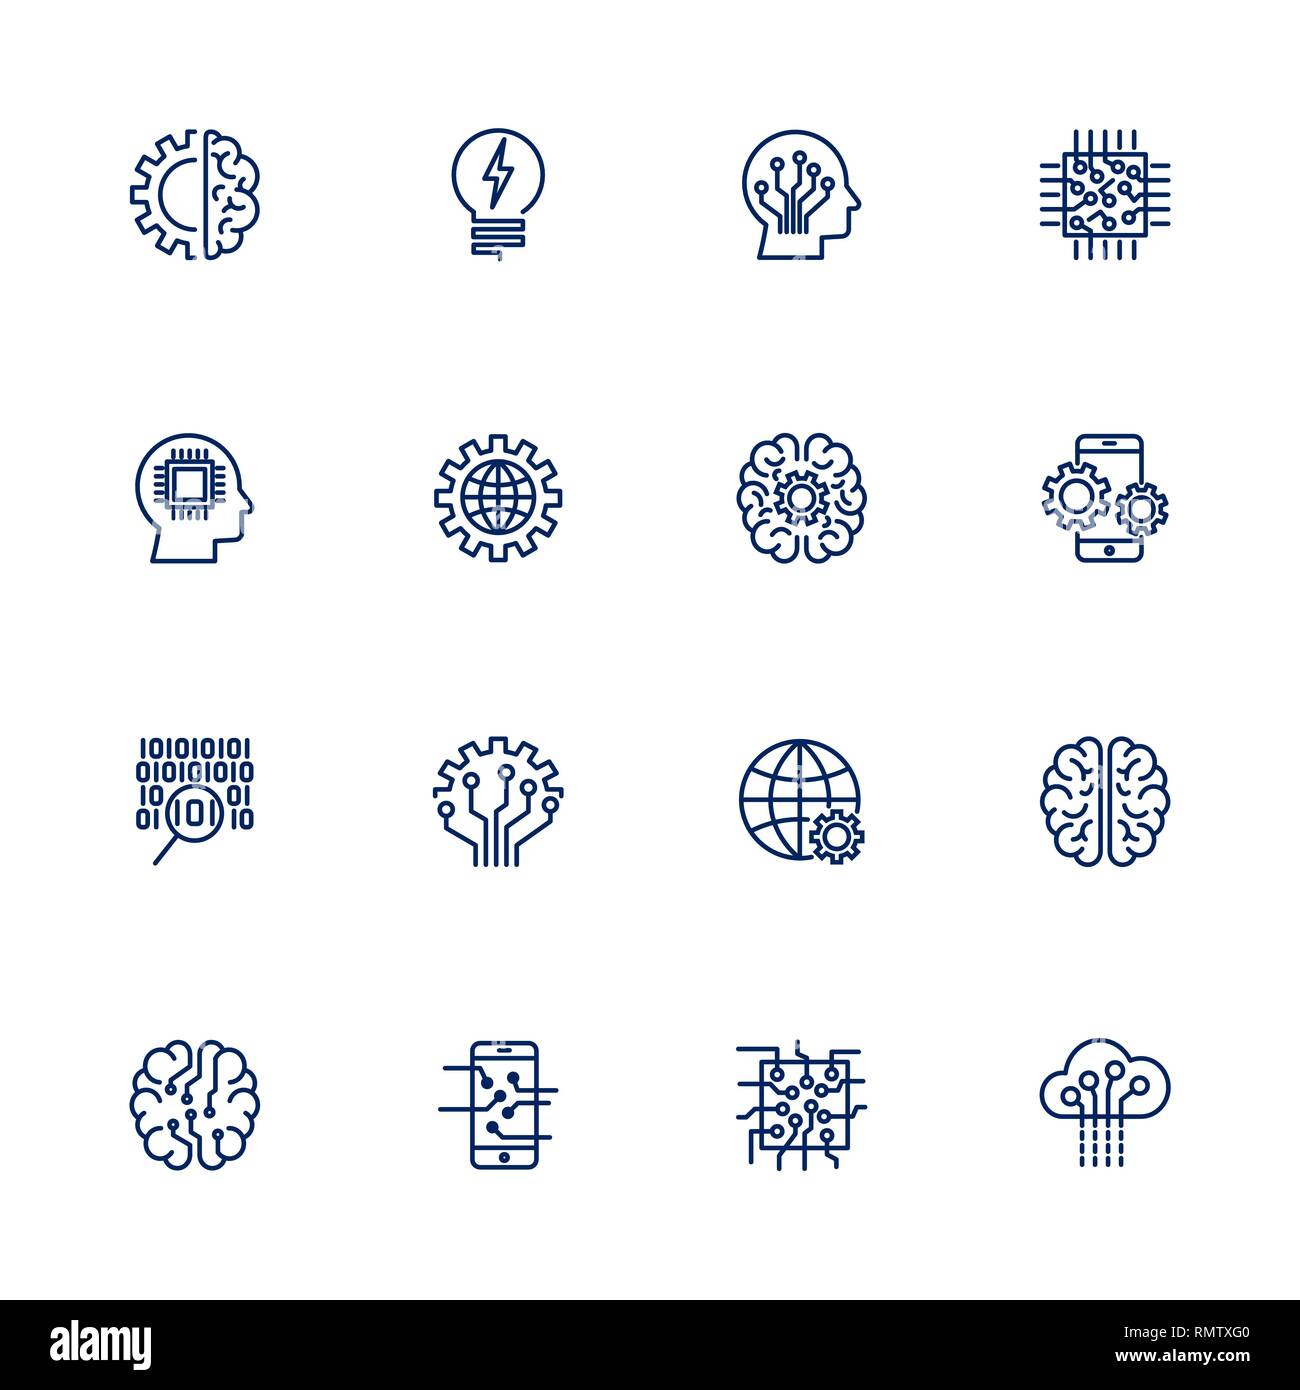 Vector icon set for artificial intelligence concept. Various symbols for the topic AI using flat design Stock Vector